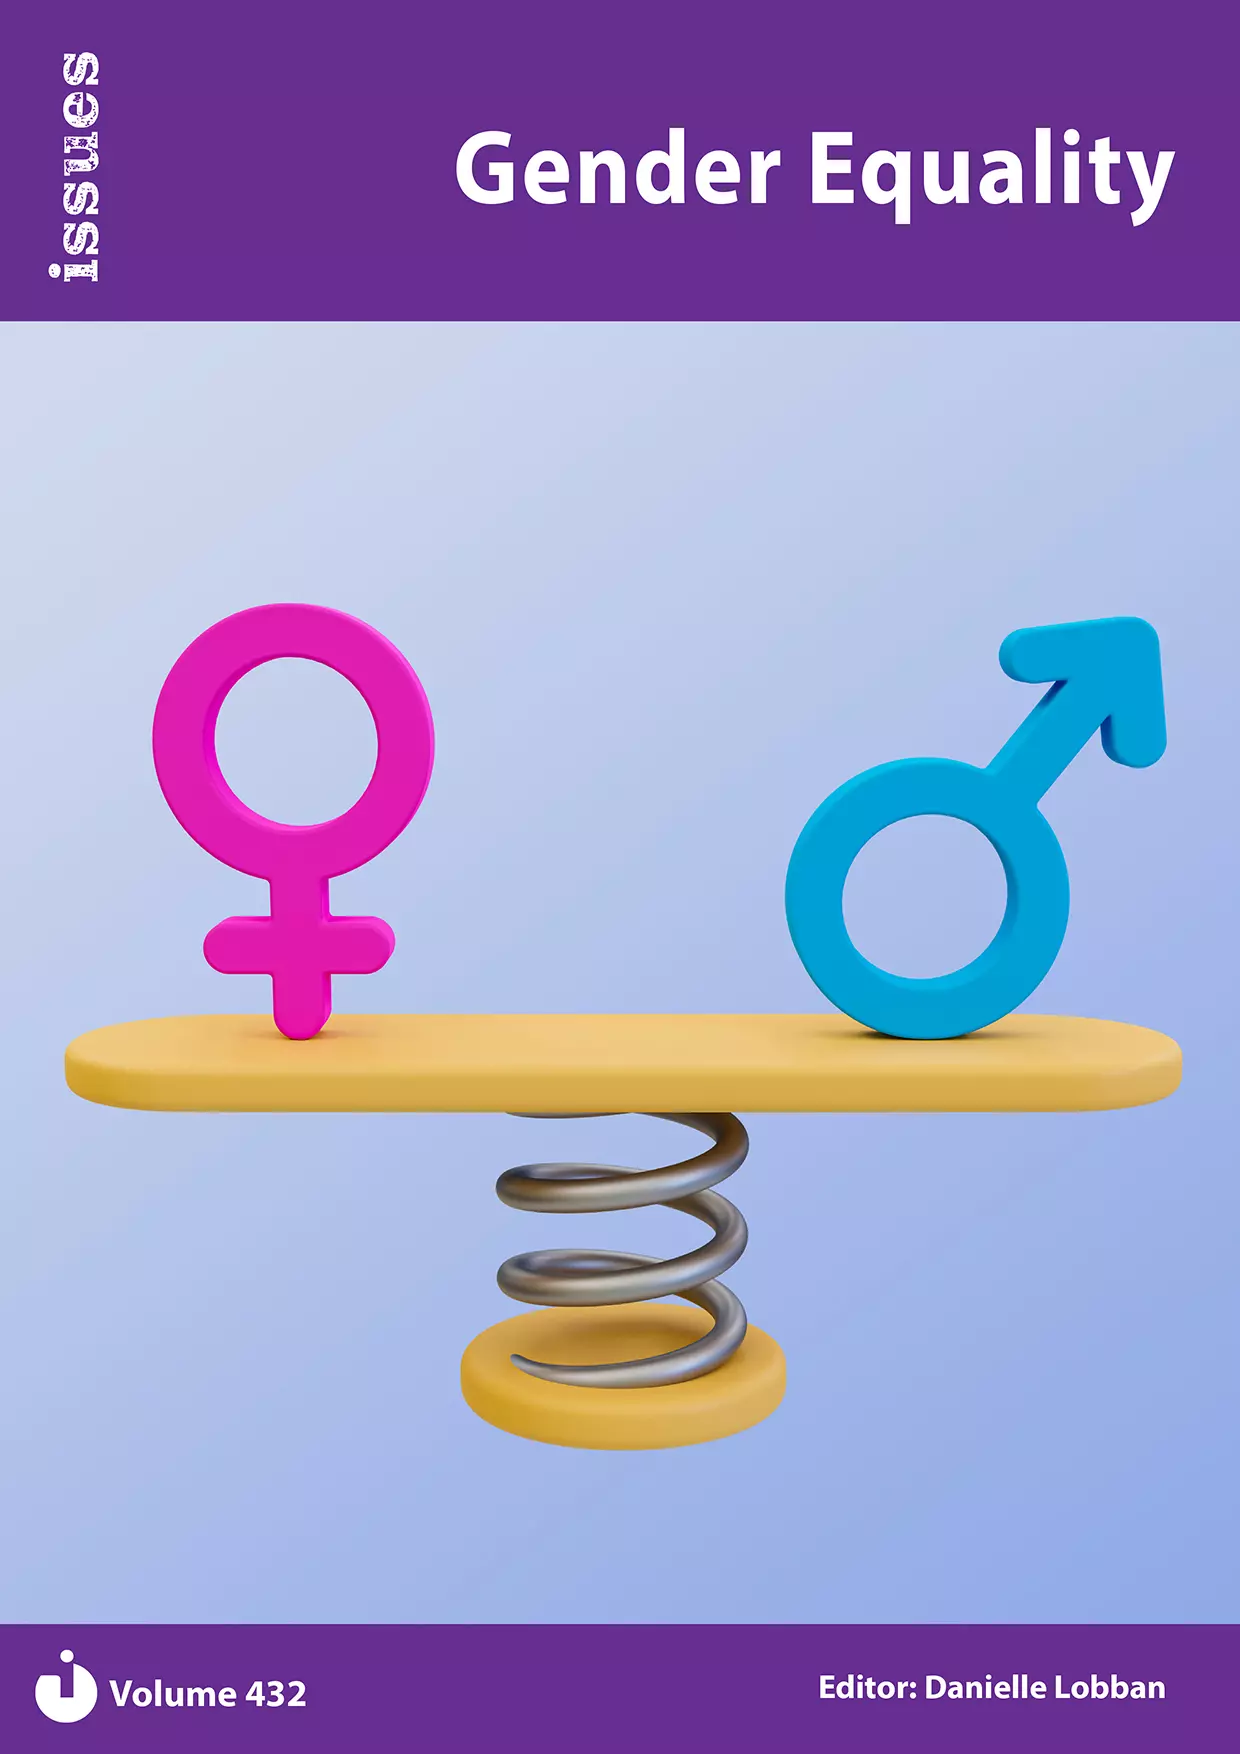 With gender equality centuries away, there is still a lot to do to improve equality. This book looks...